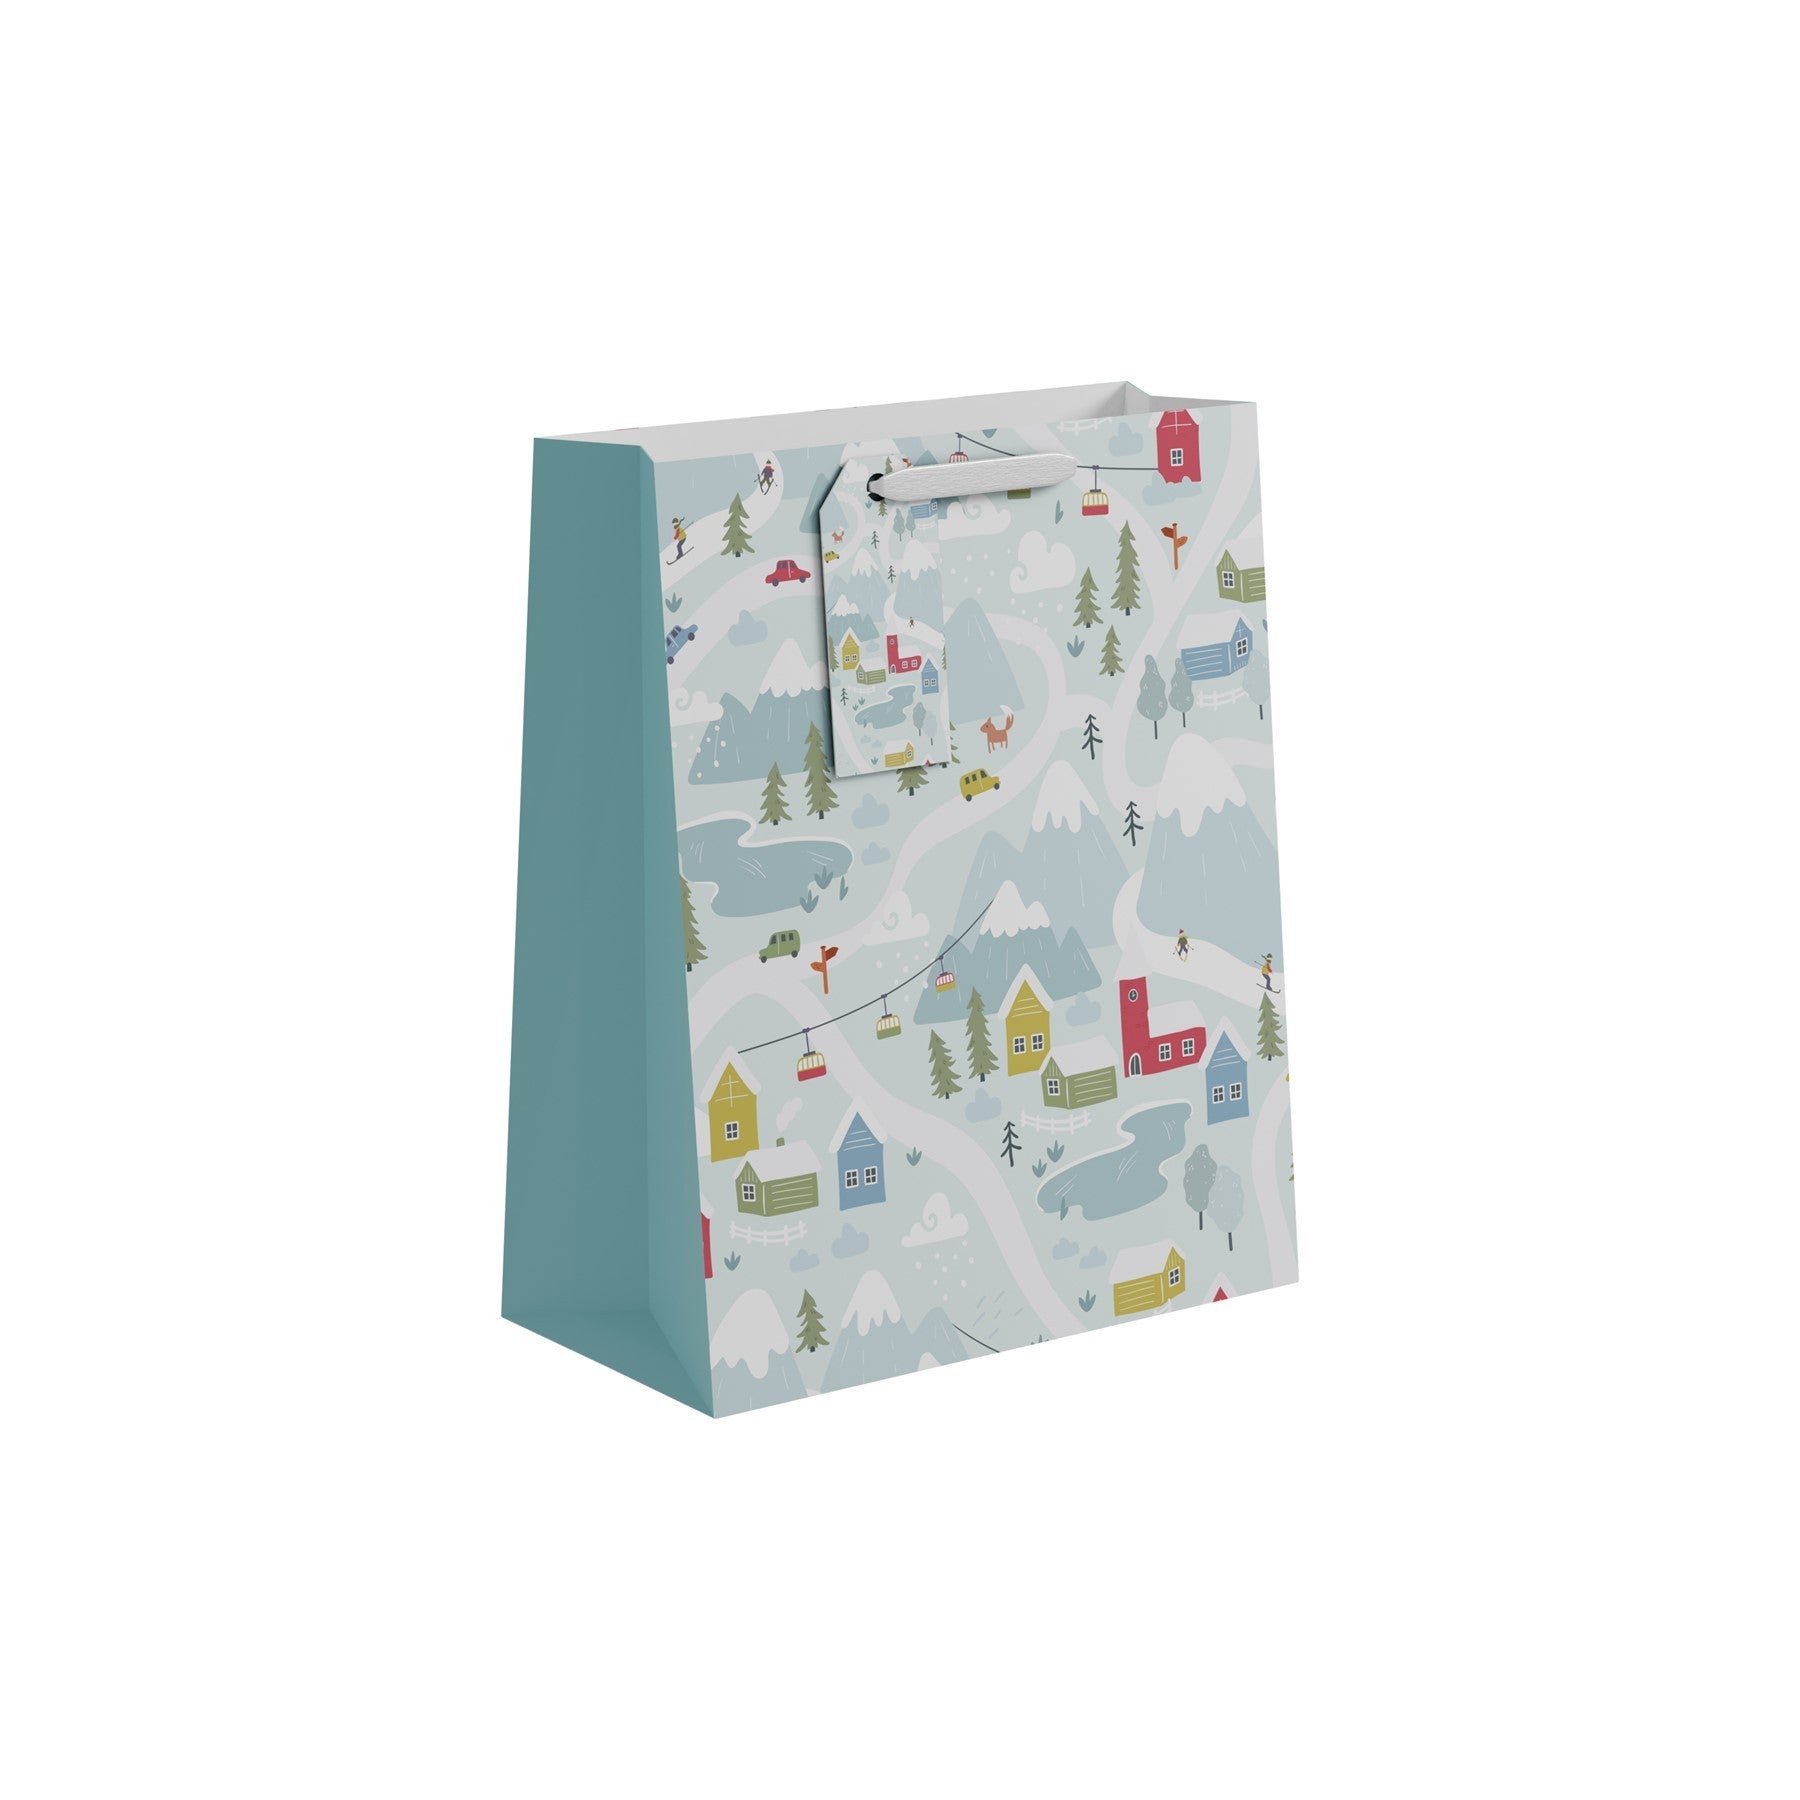 View Mountain with Cable Car Gift Bag Large information